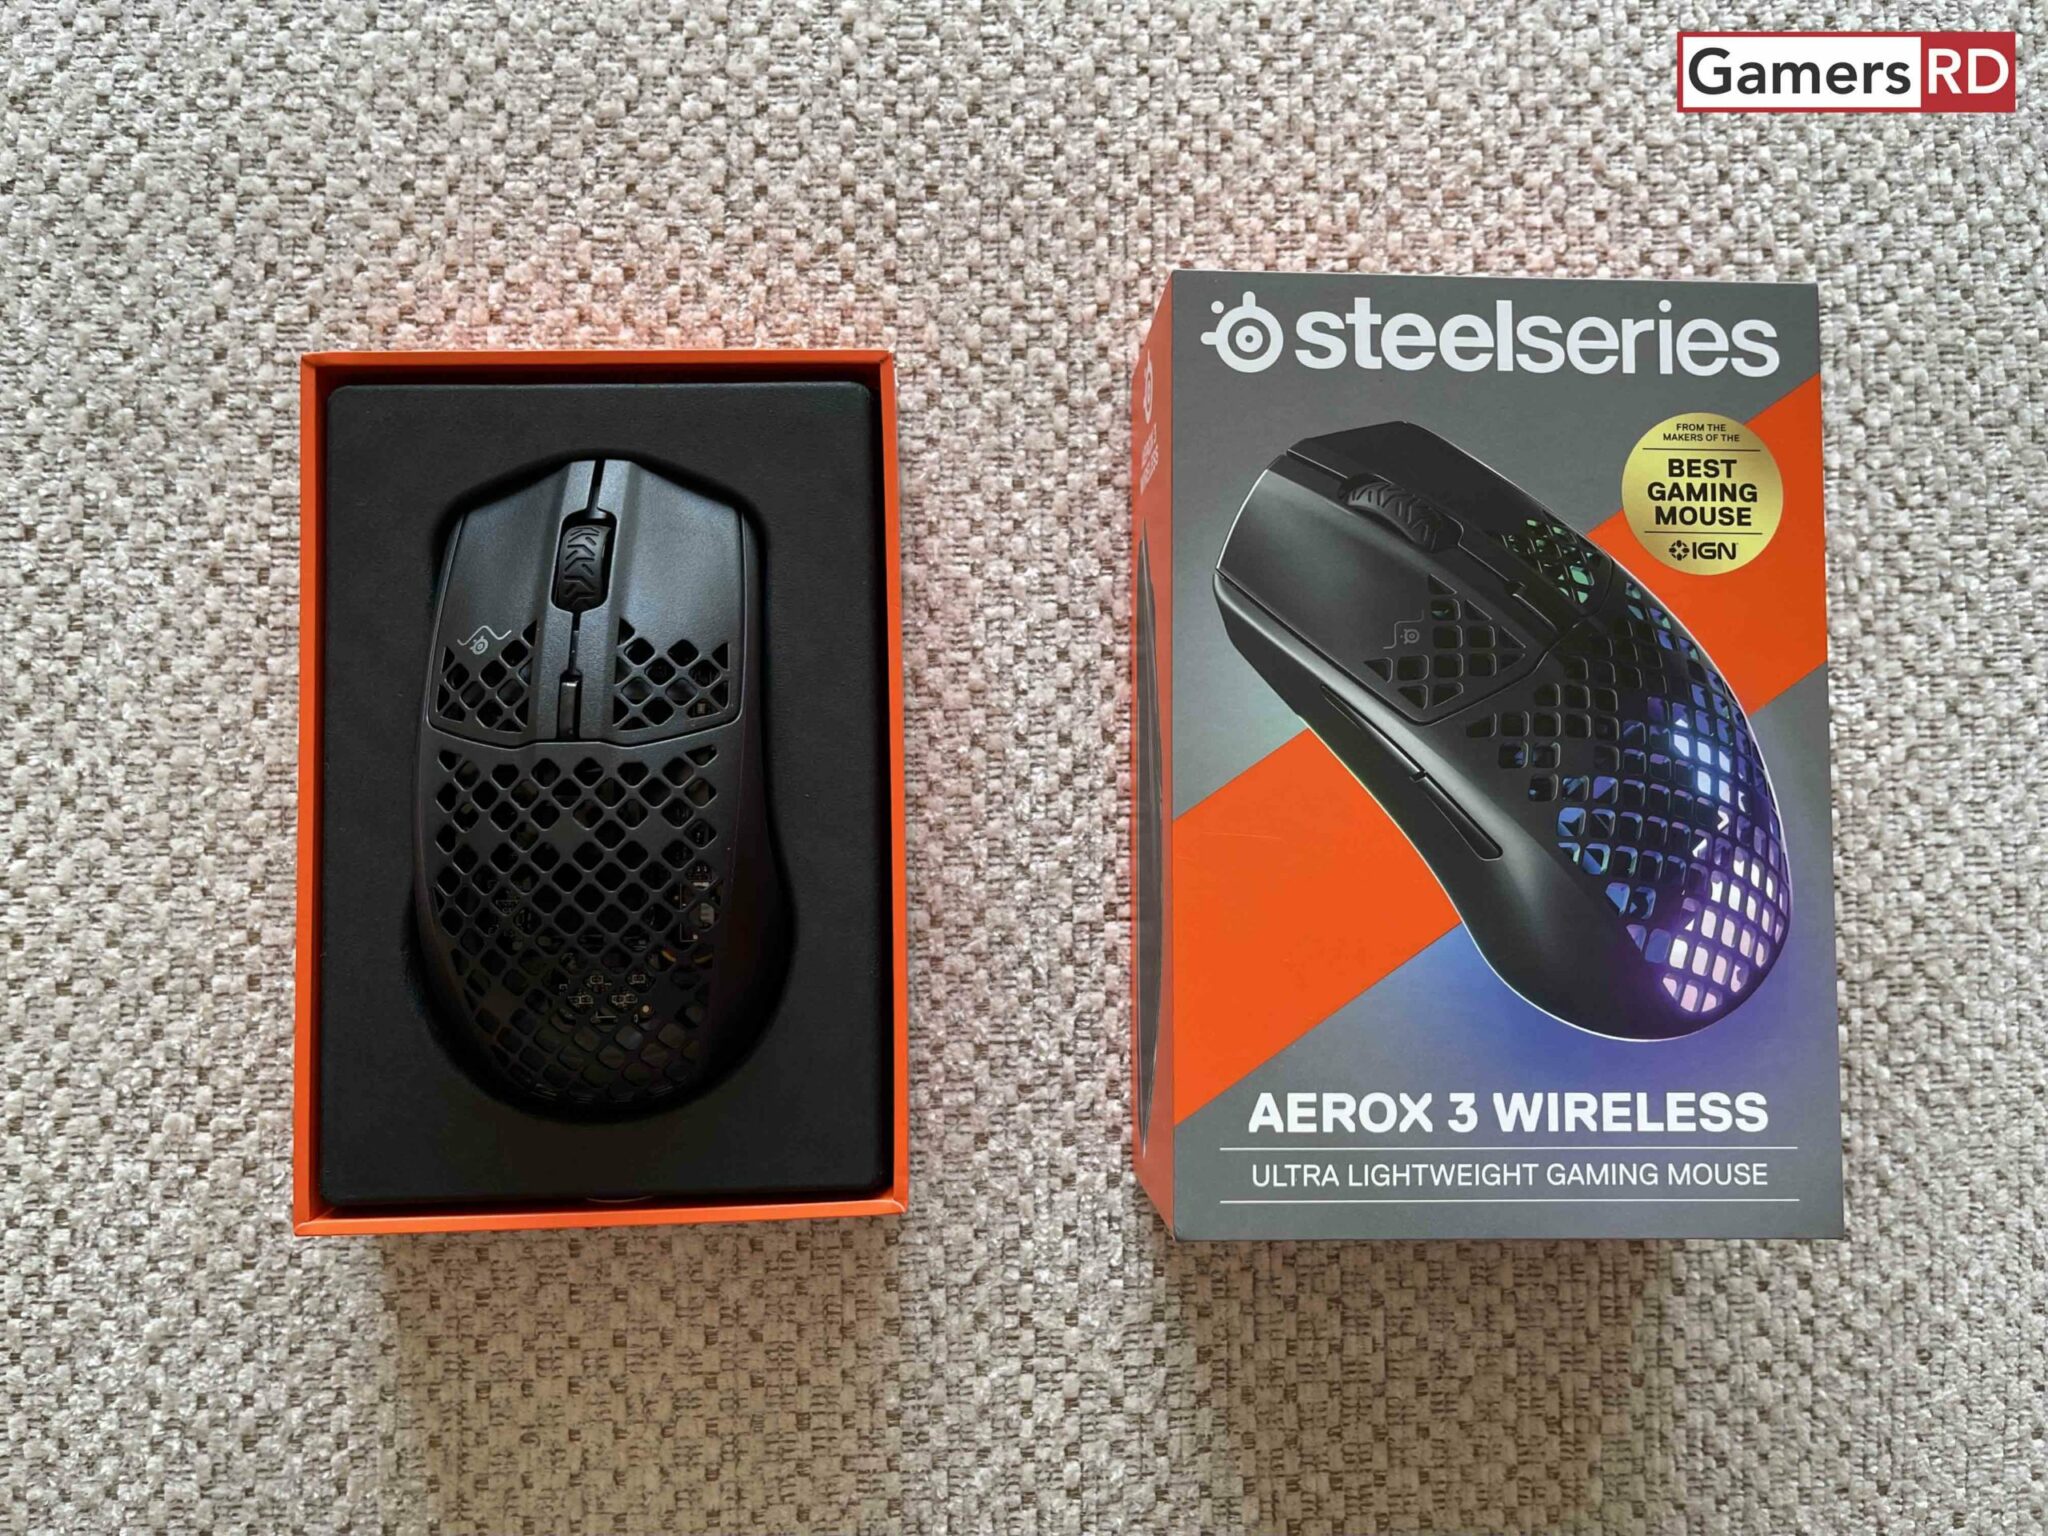 Steel Series Aerox 3 Wireless mouse gaming, Review 4 GamersRD